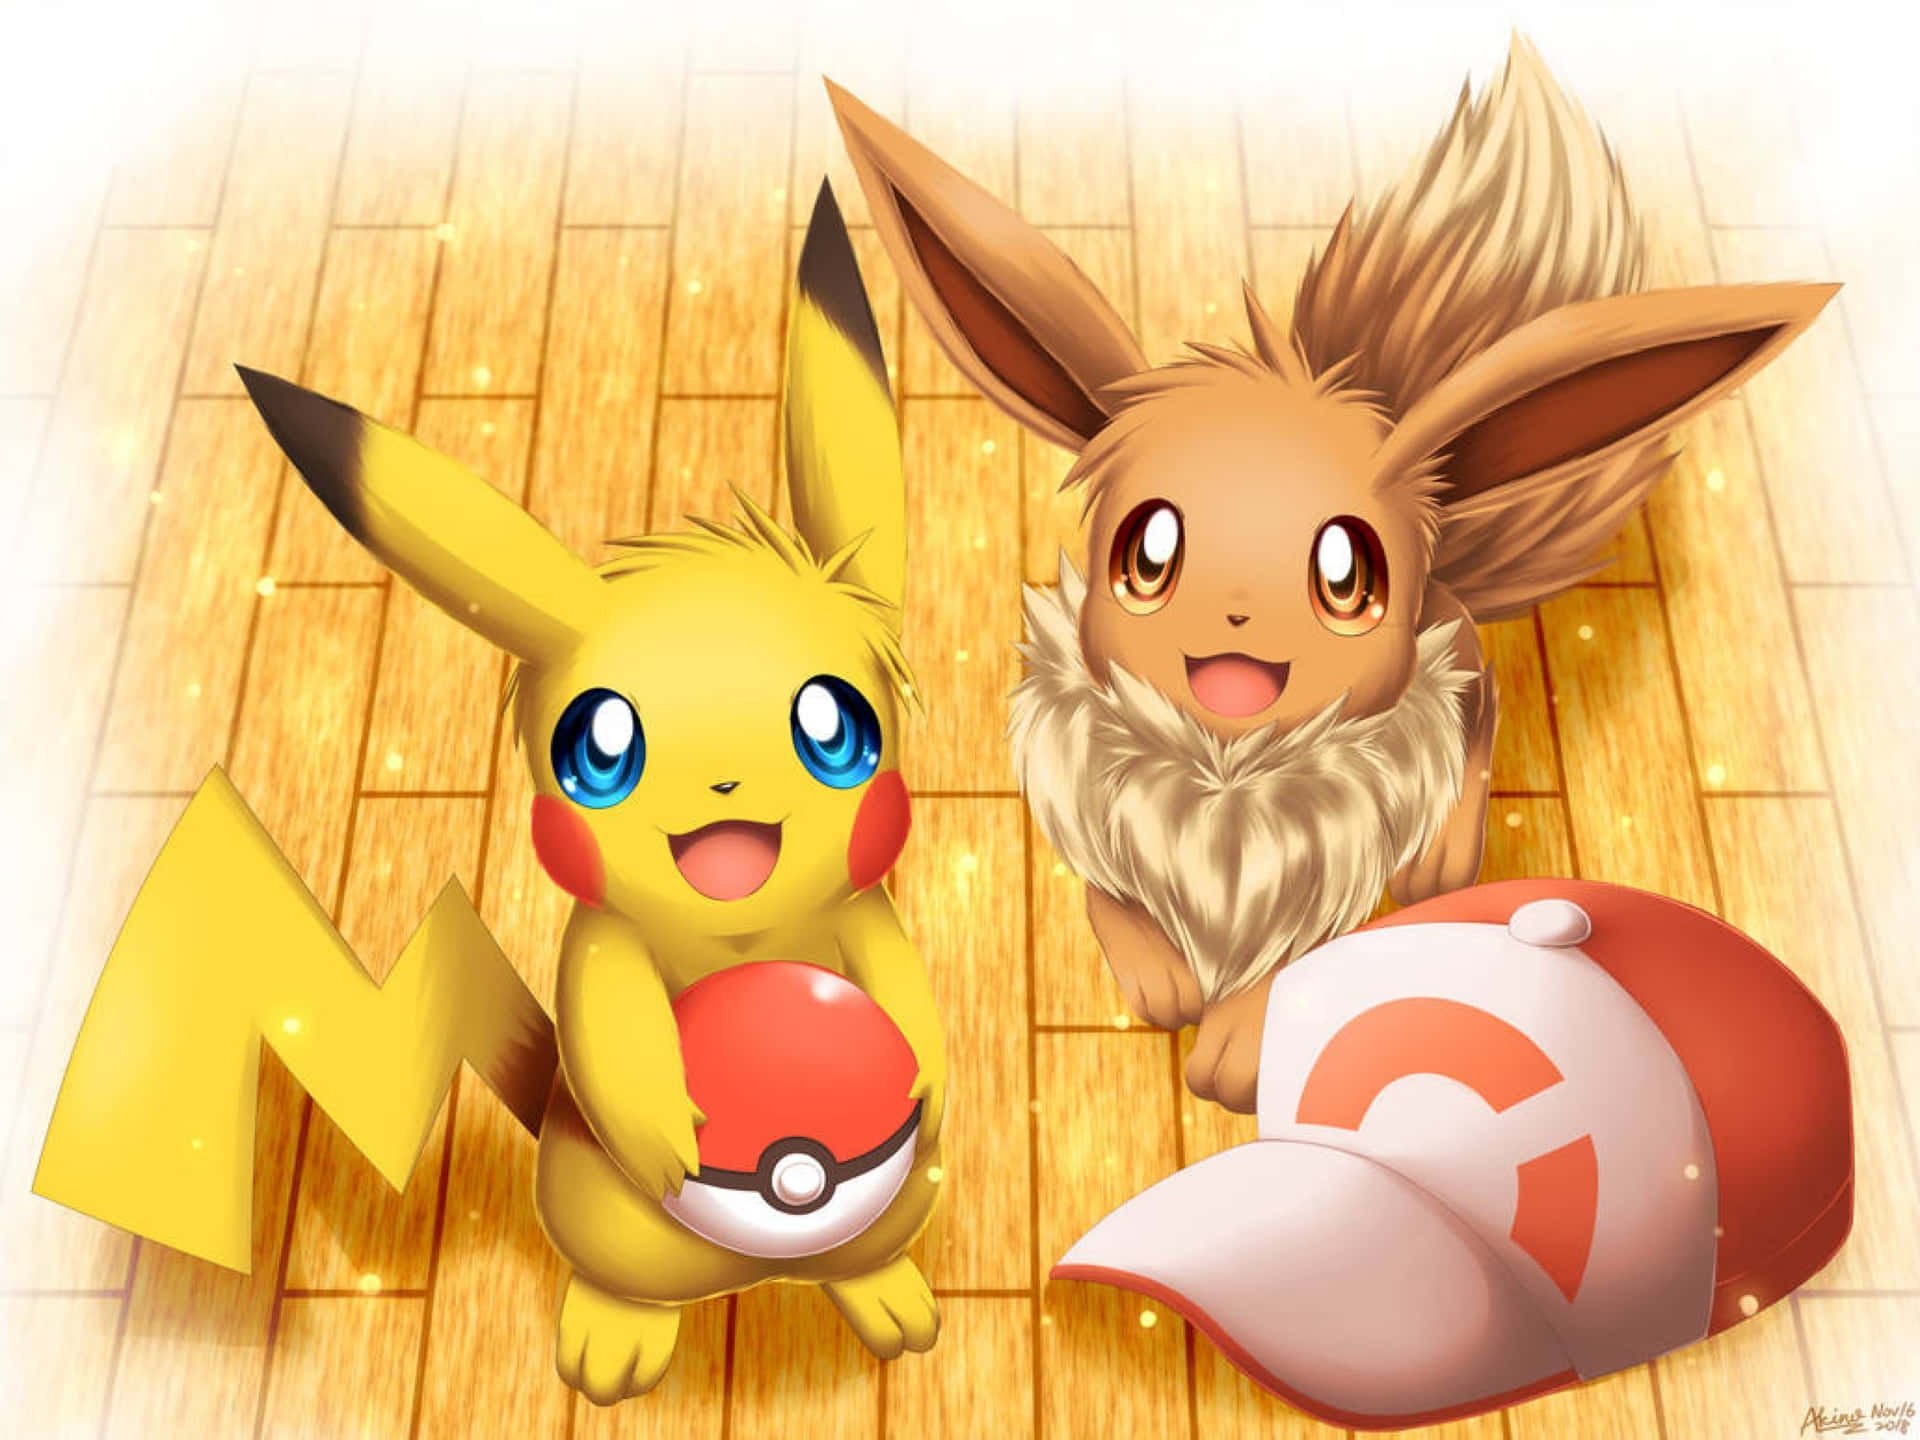 Download This Pokemon Let's GO Pikachu/Eevee Wallpaper For Your PC And  Smartphone – NintendoSoup